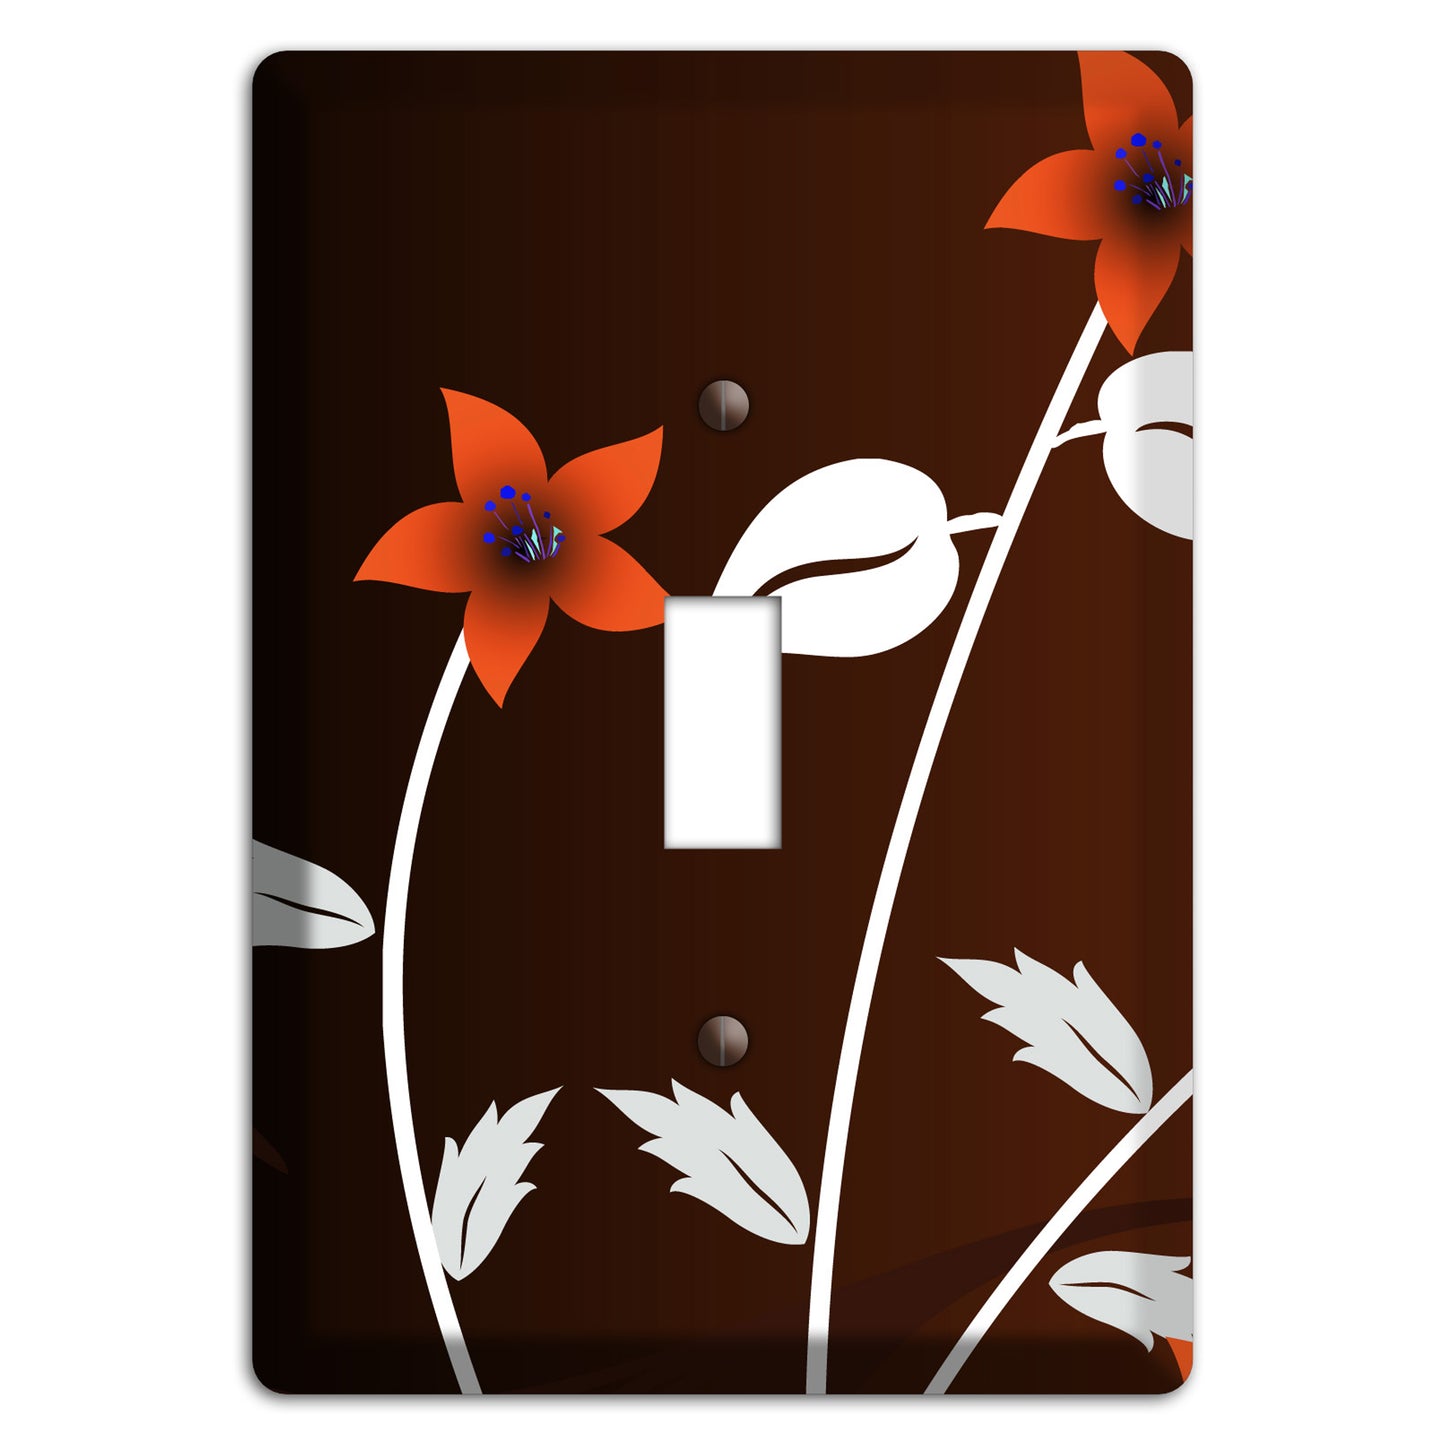 Black and Red Double Sprig Cover Plates